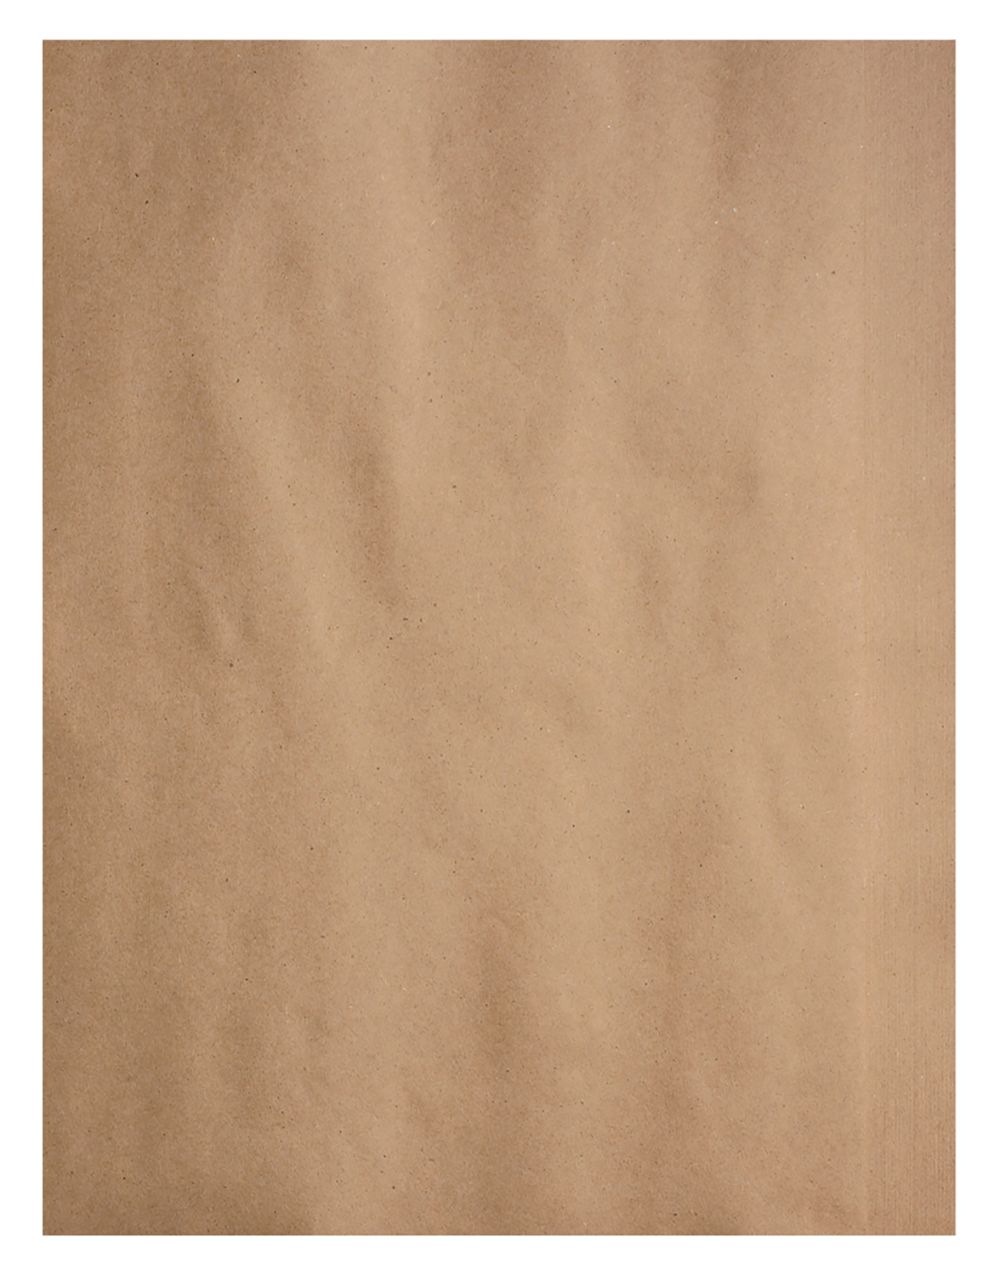 Pacon Kraft Paper Roll 18 x 1000 40 Lb 100percent Recycled White